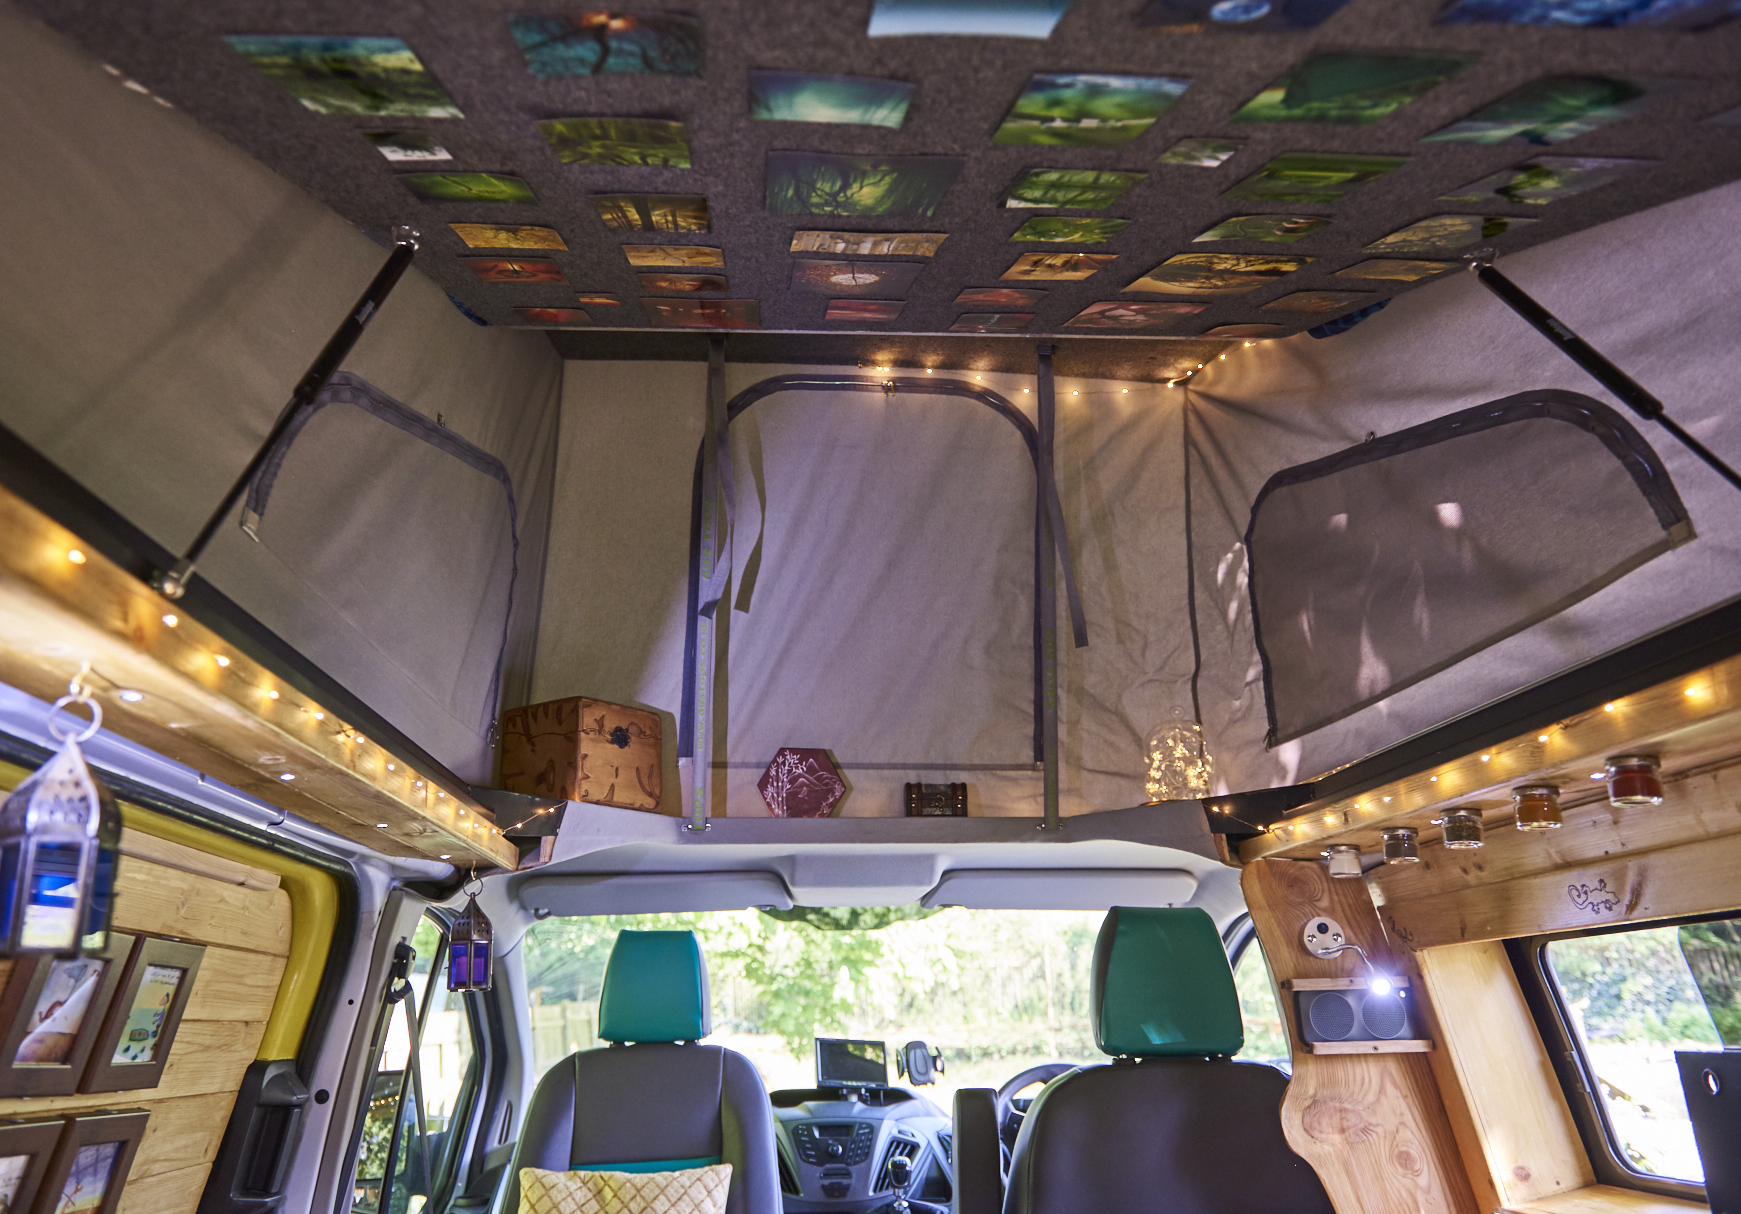 Interior of a camper van with cozy decorations. The ceiling is adorned with photographs. The walls are decorated with wooden accents and small jars. Fairy lights illuminate the space, providing a warm ambiance. The seating area includes green and black seats with pillows.